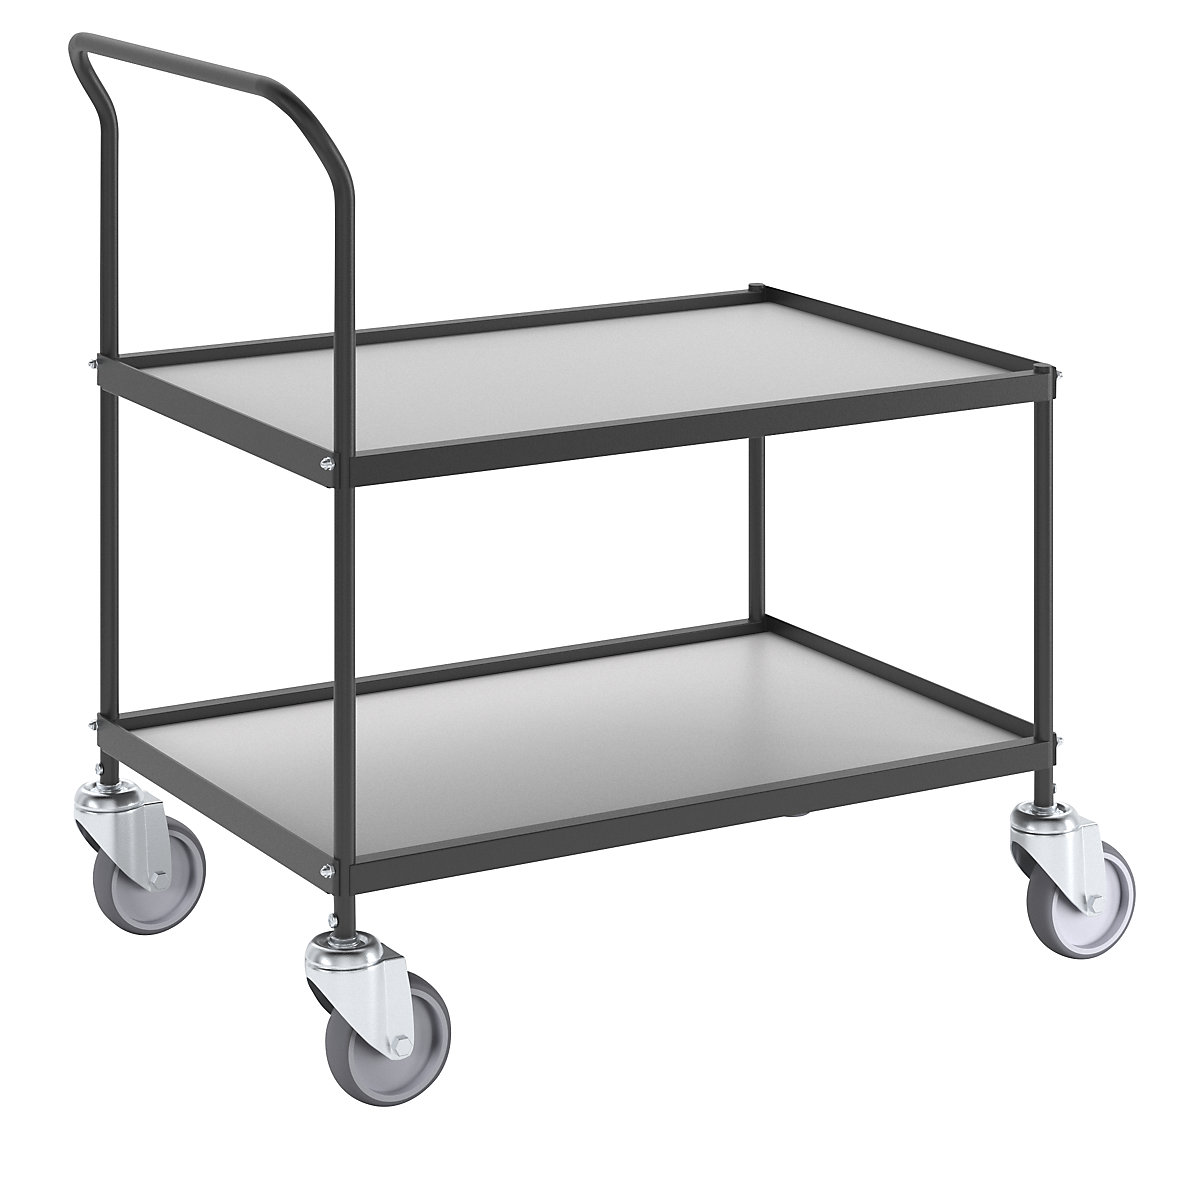 Serving and clearing trolley, 2 shelves, LxWxH 830 x 545 x 920 mm, 2+ items-10